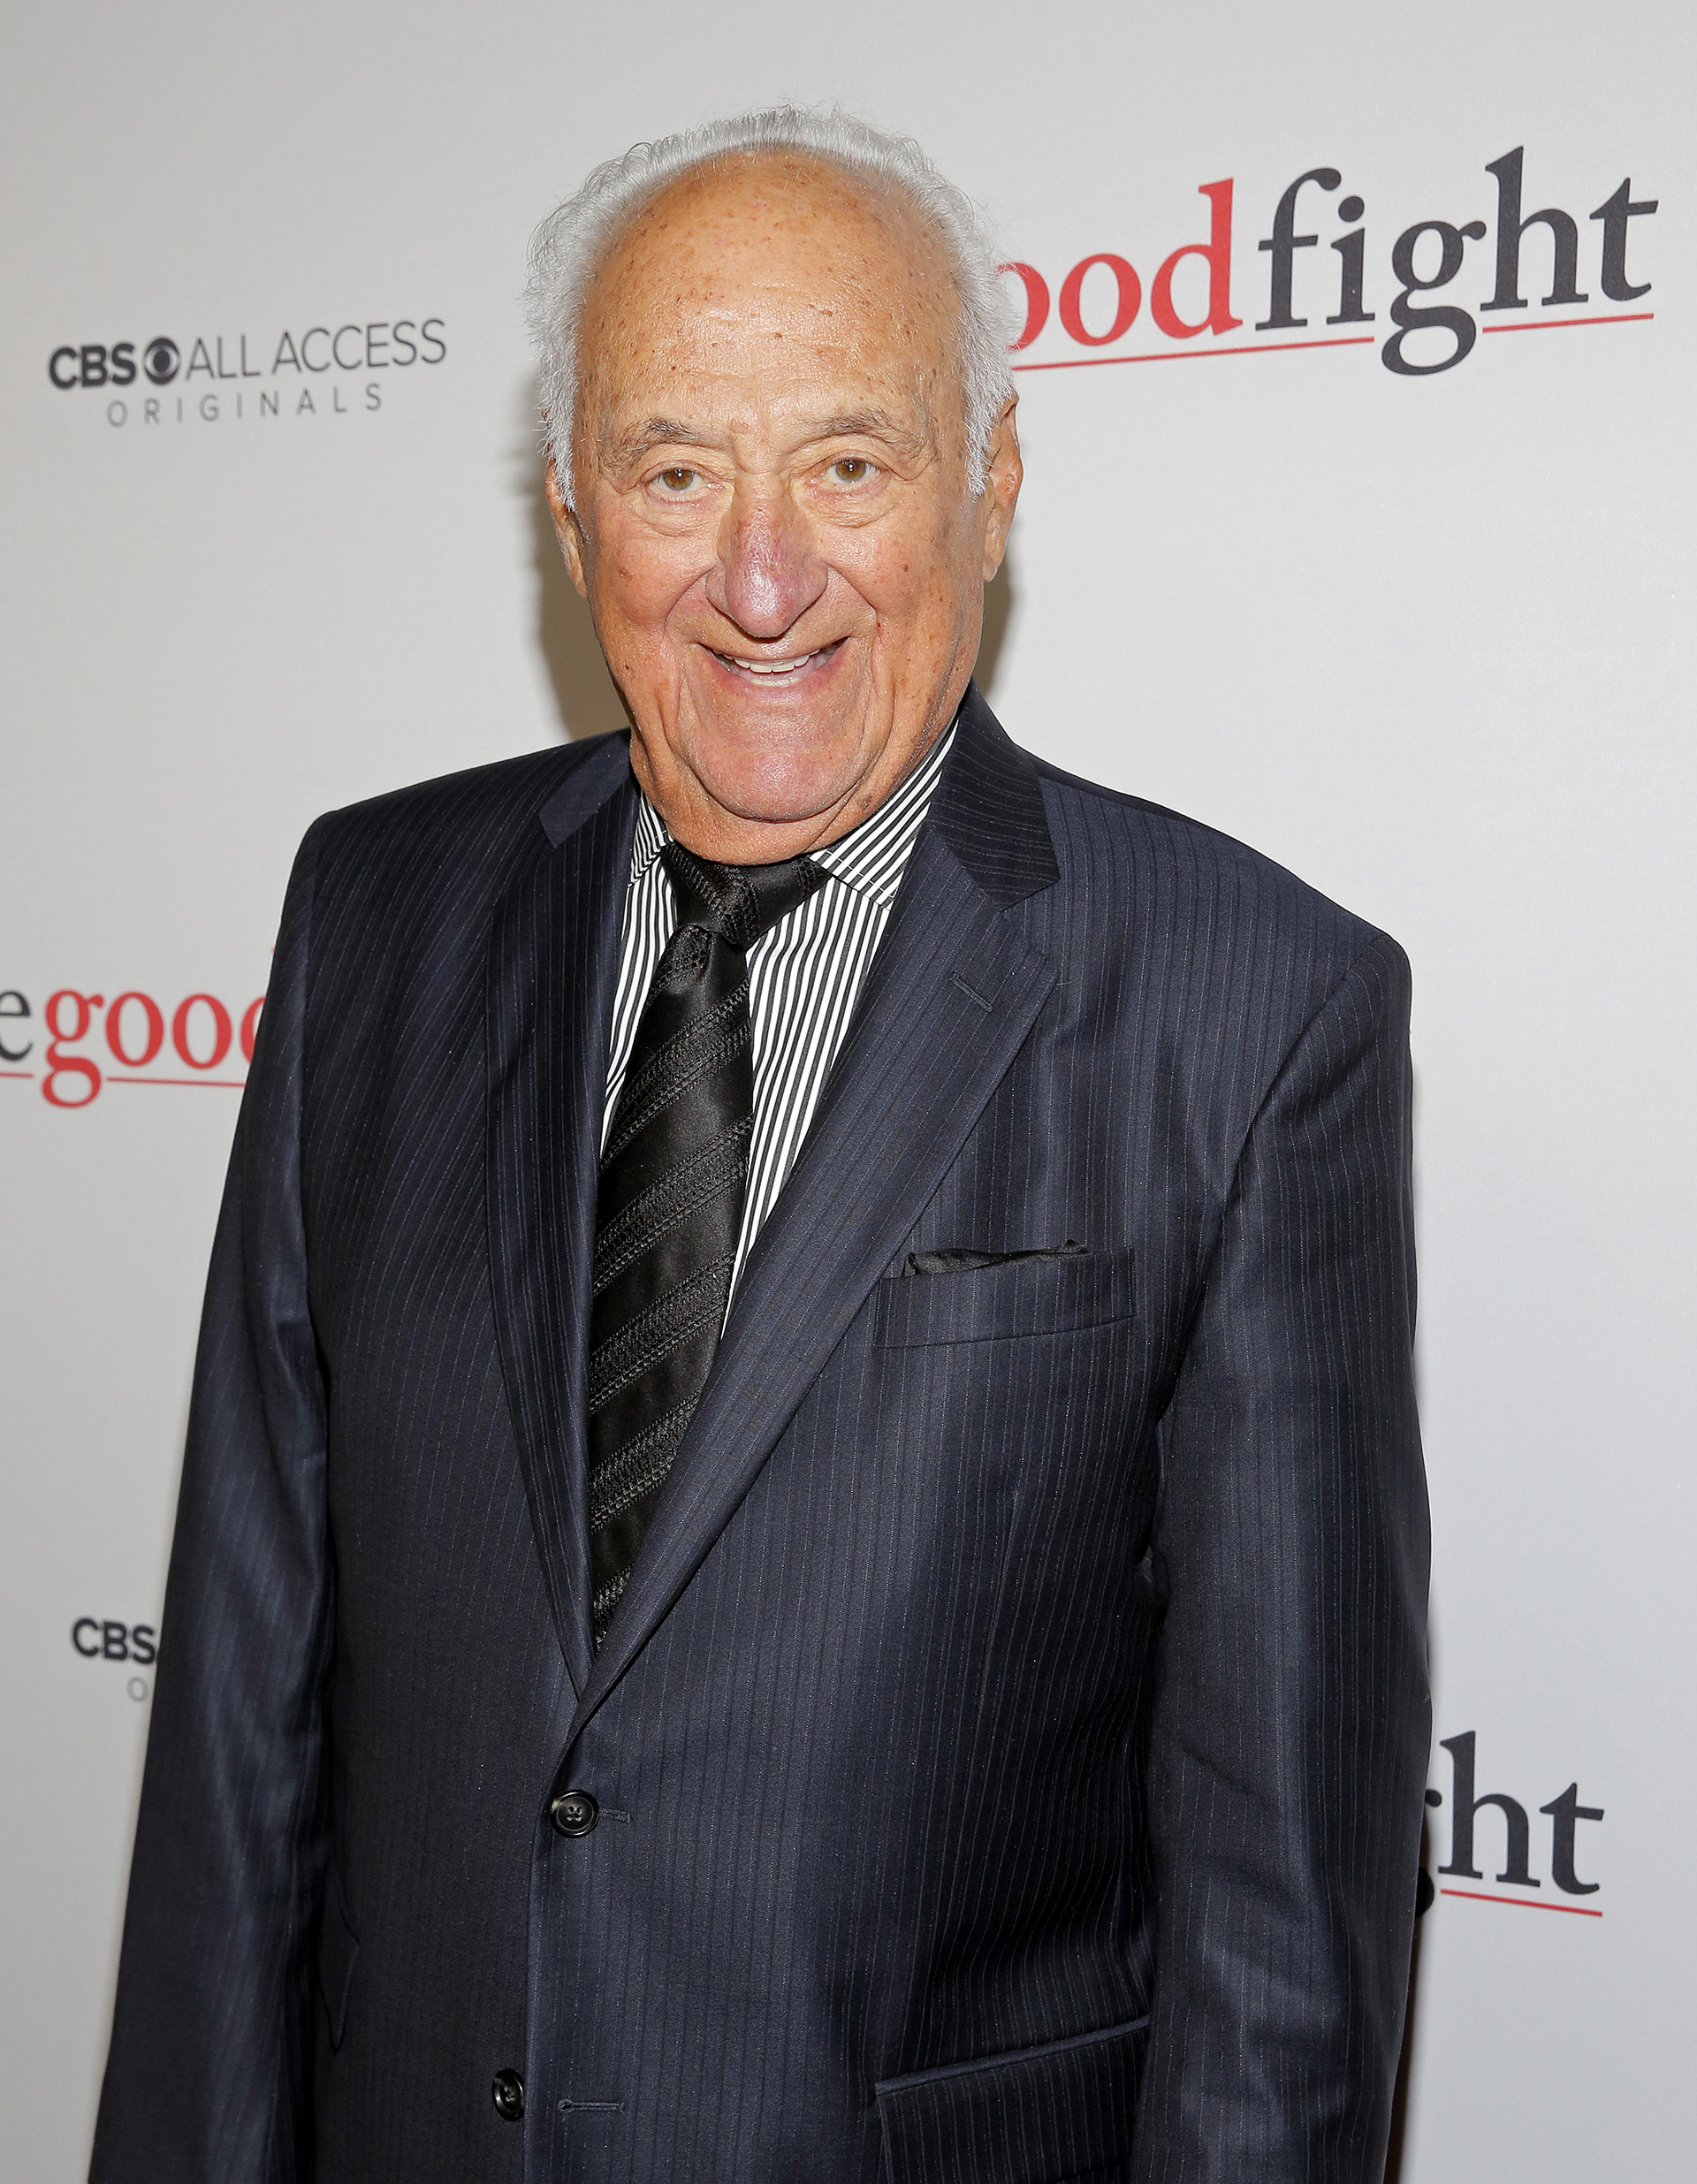 Jerry Adler is all smiles on The Good Fight red carpet.